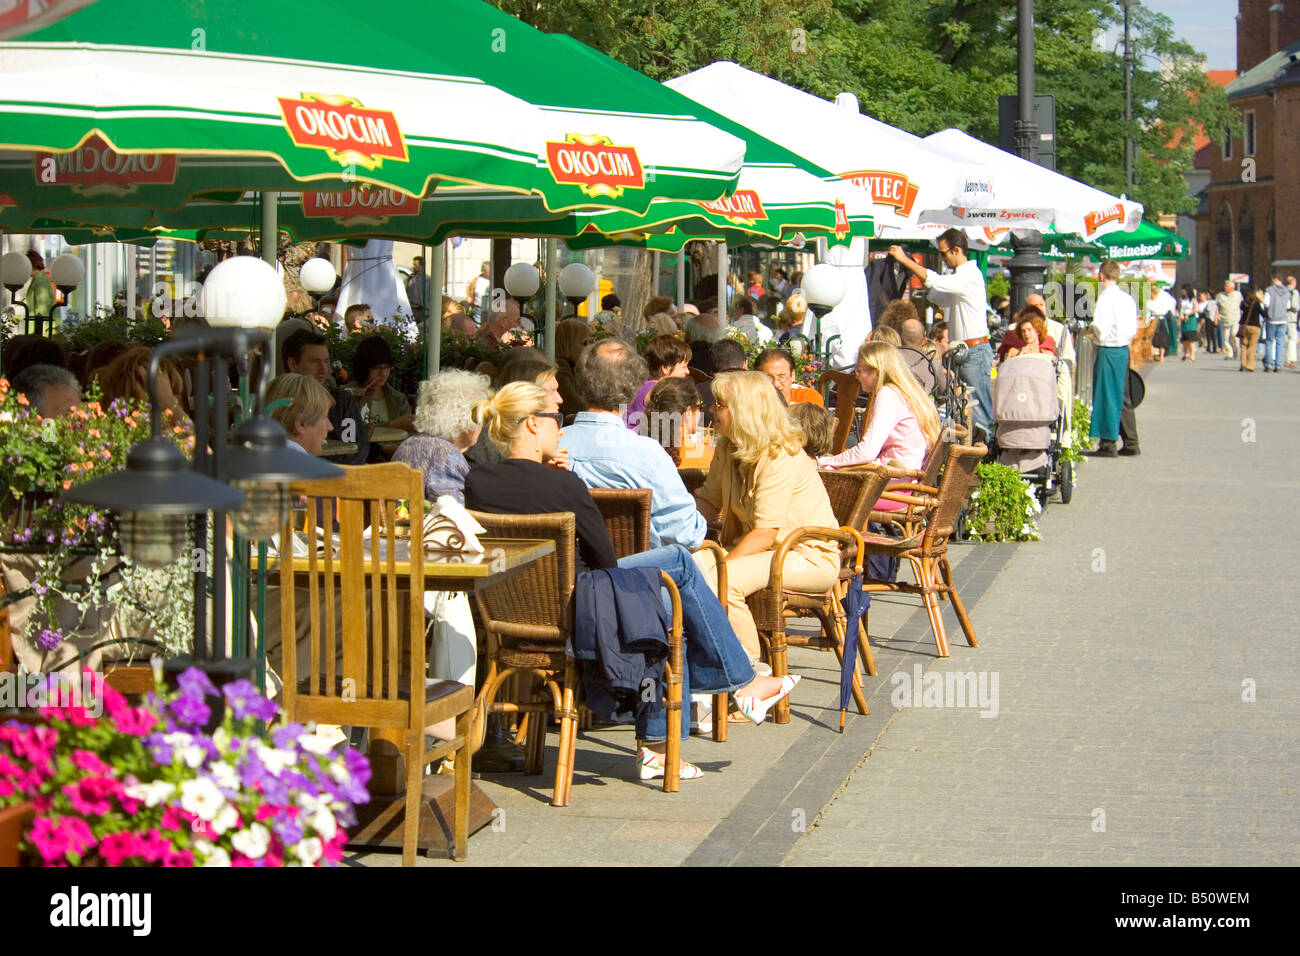 The Main Market Square of Krakow in Poland showing the cafe culture. Stock Photo